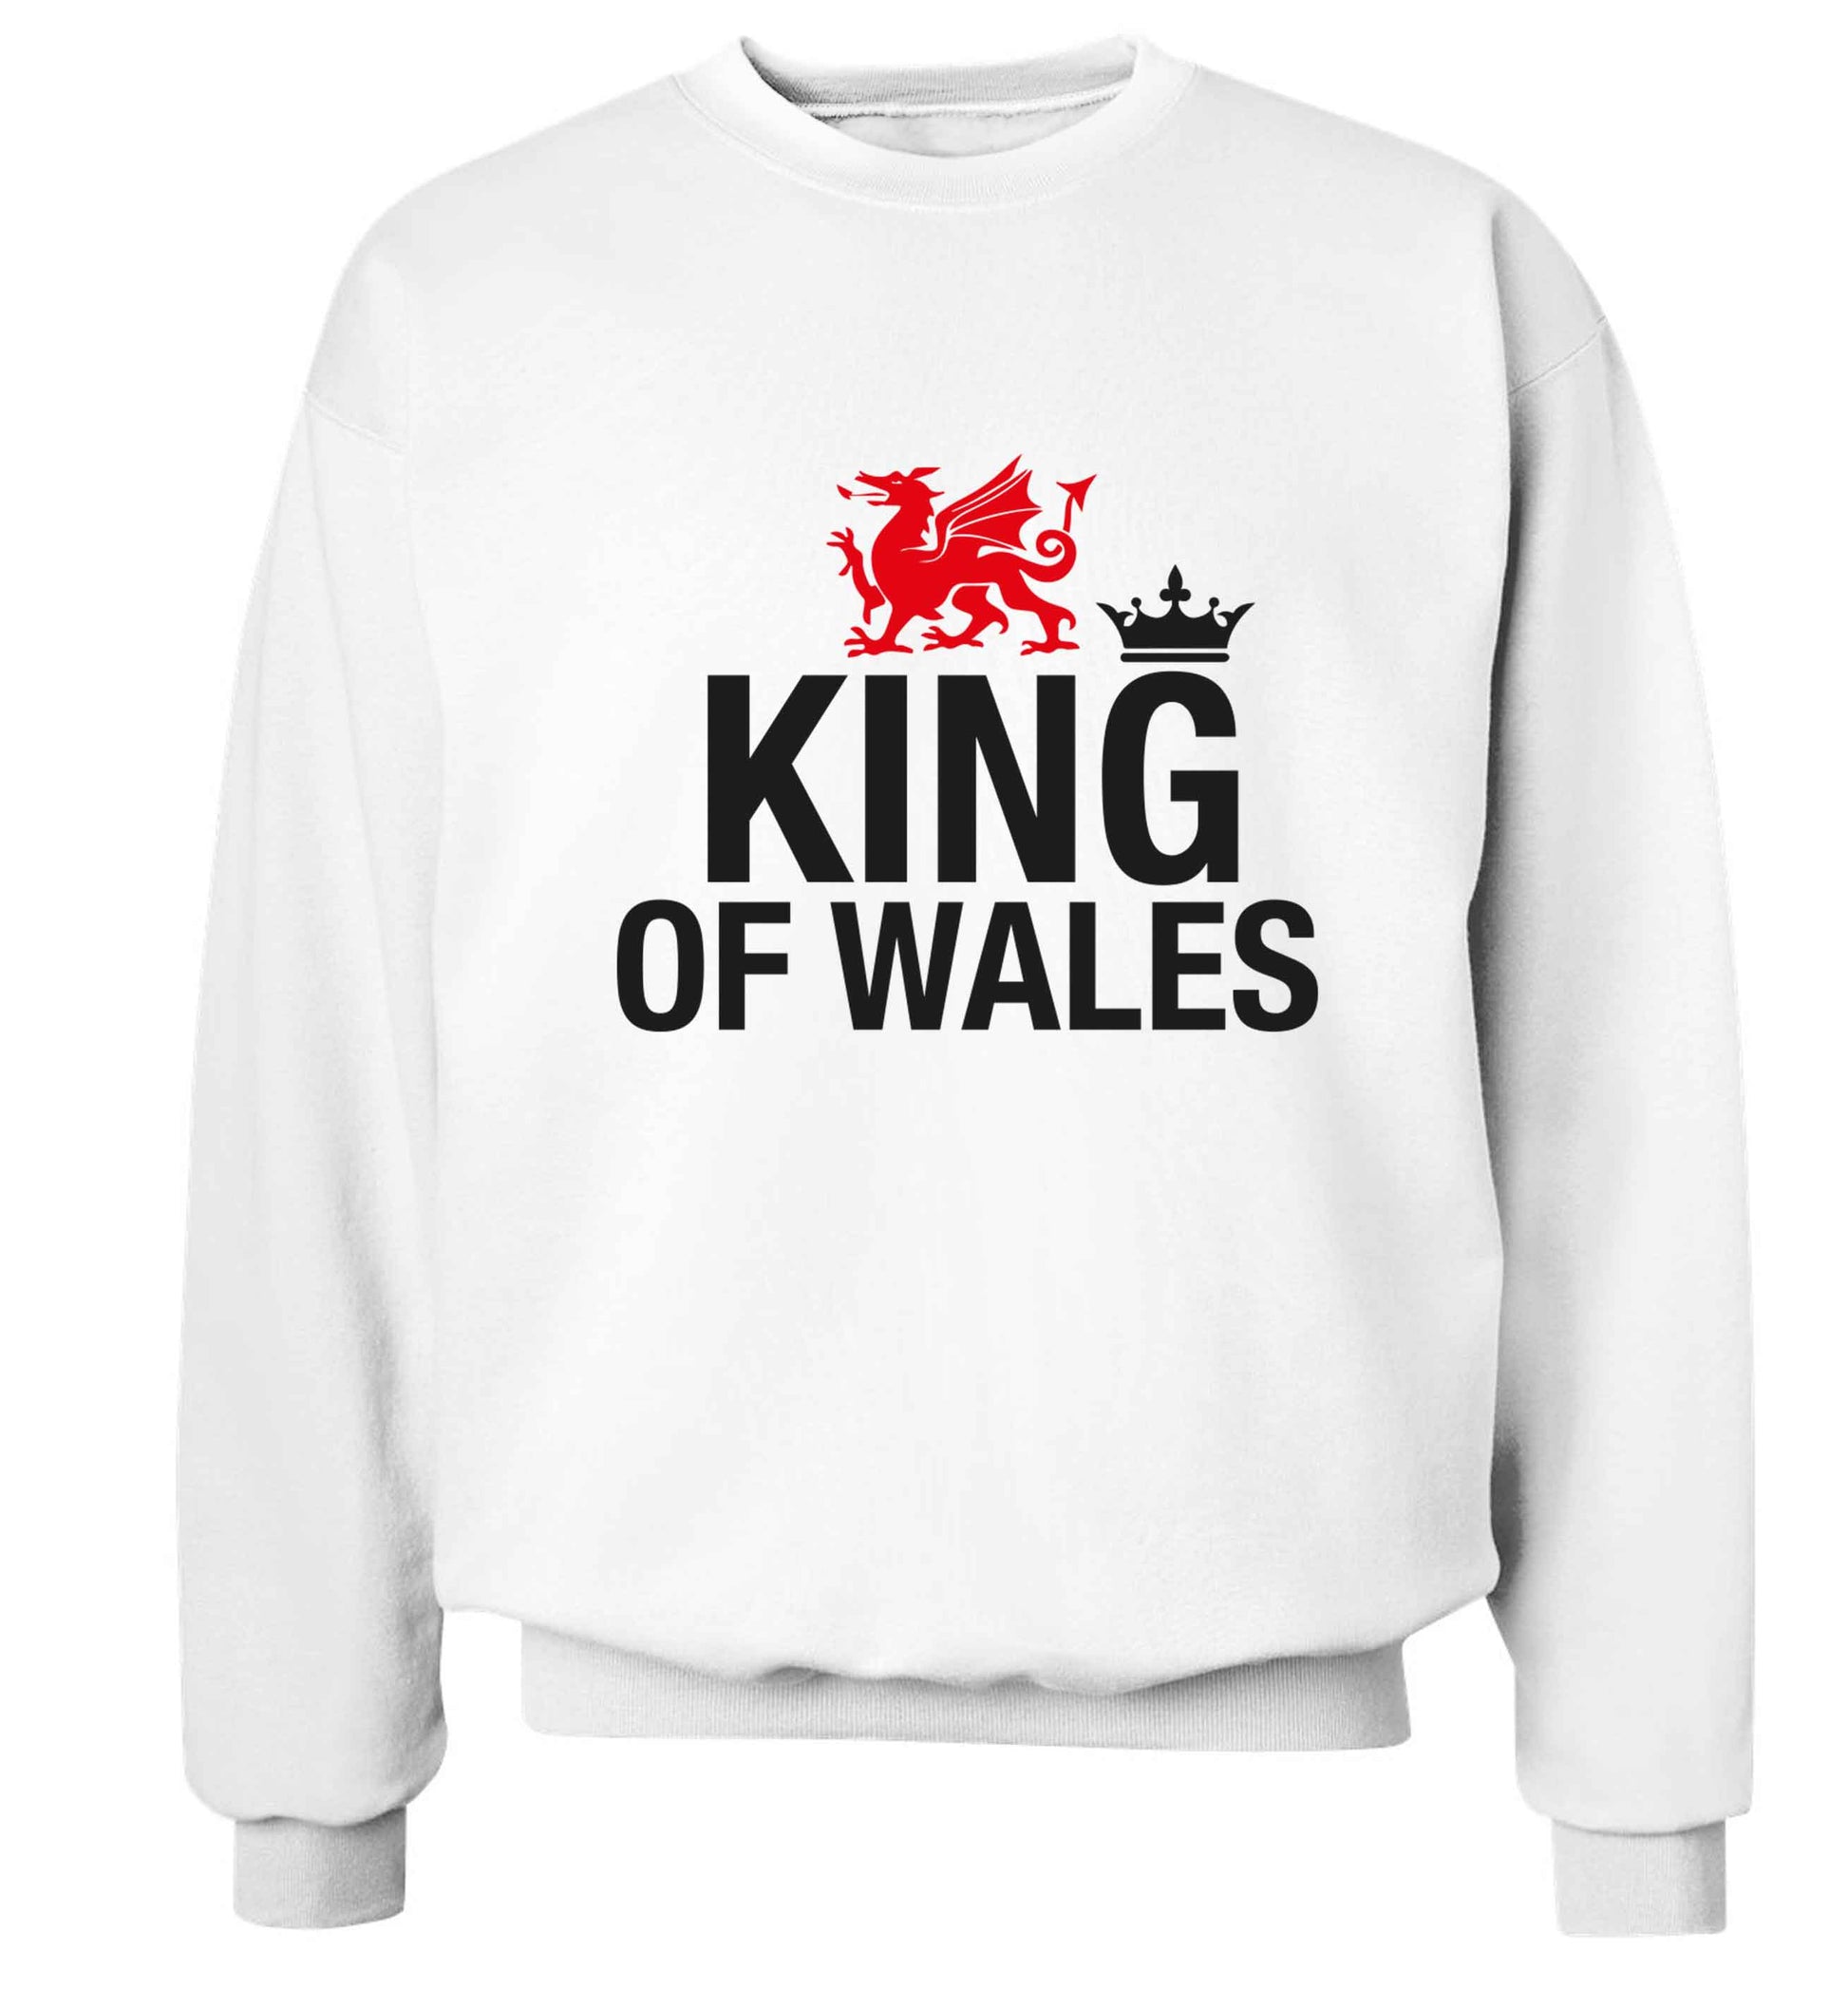 King of Wales Adult's unisex white Sweater 2XL